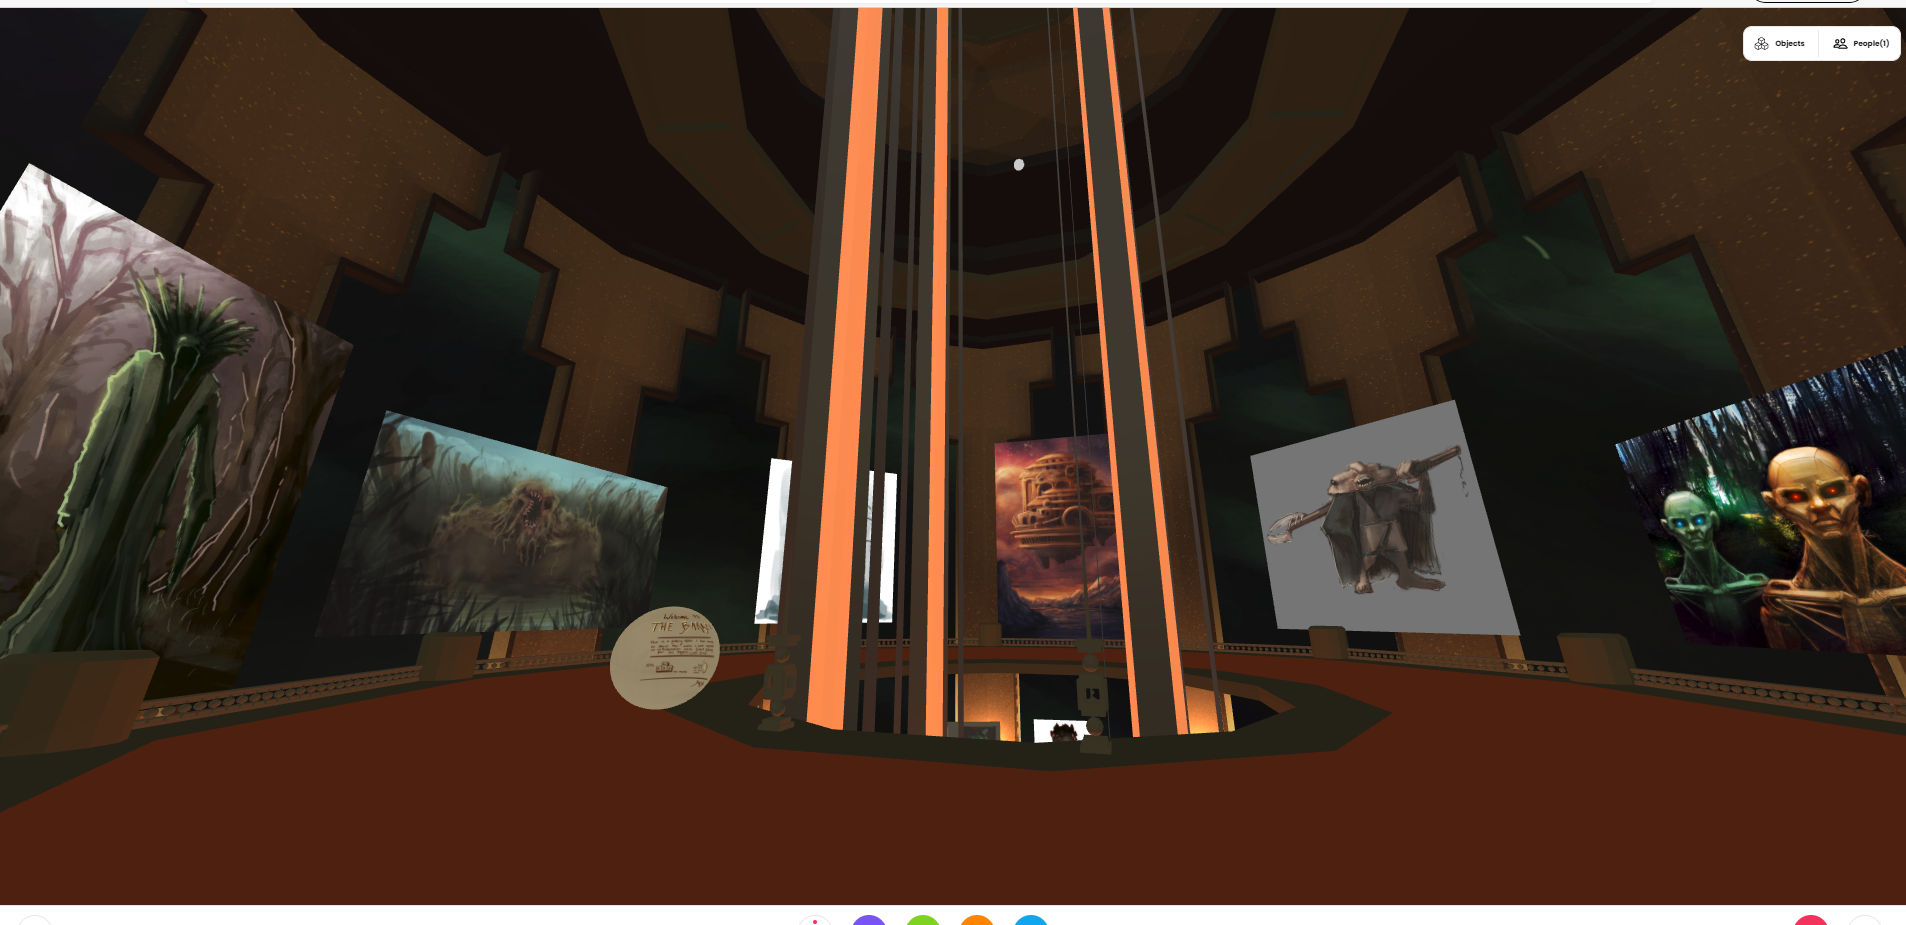 ‘In the barrel’ Screenshot from within the Lost Eons gallery that I created.